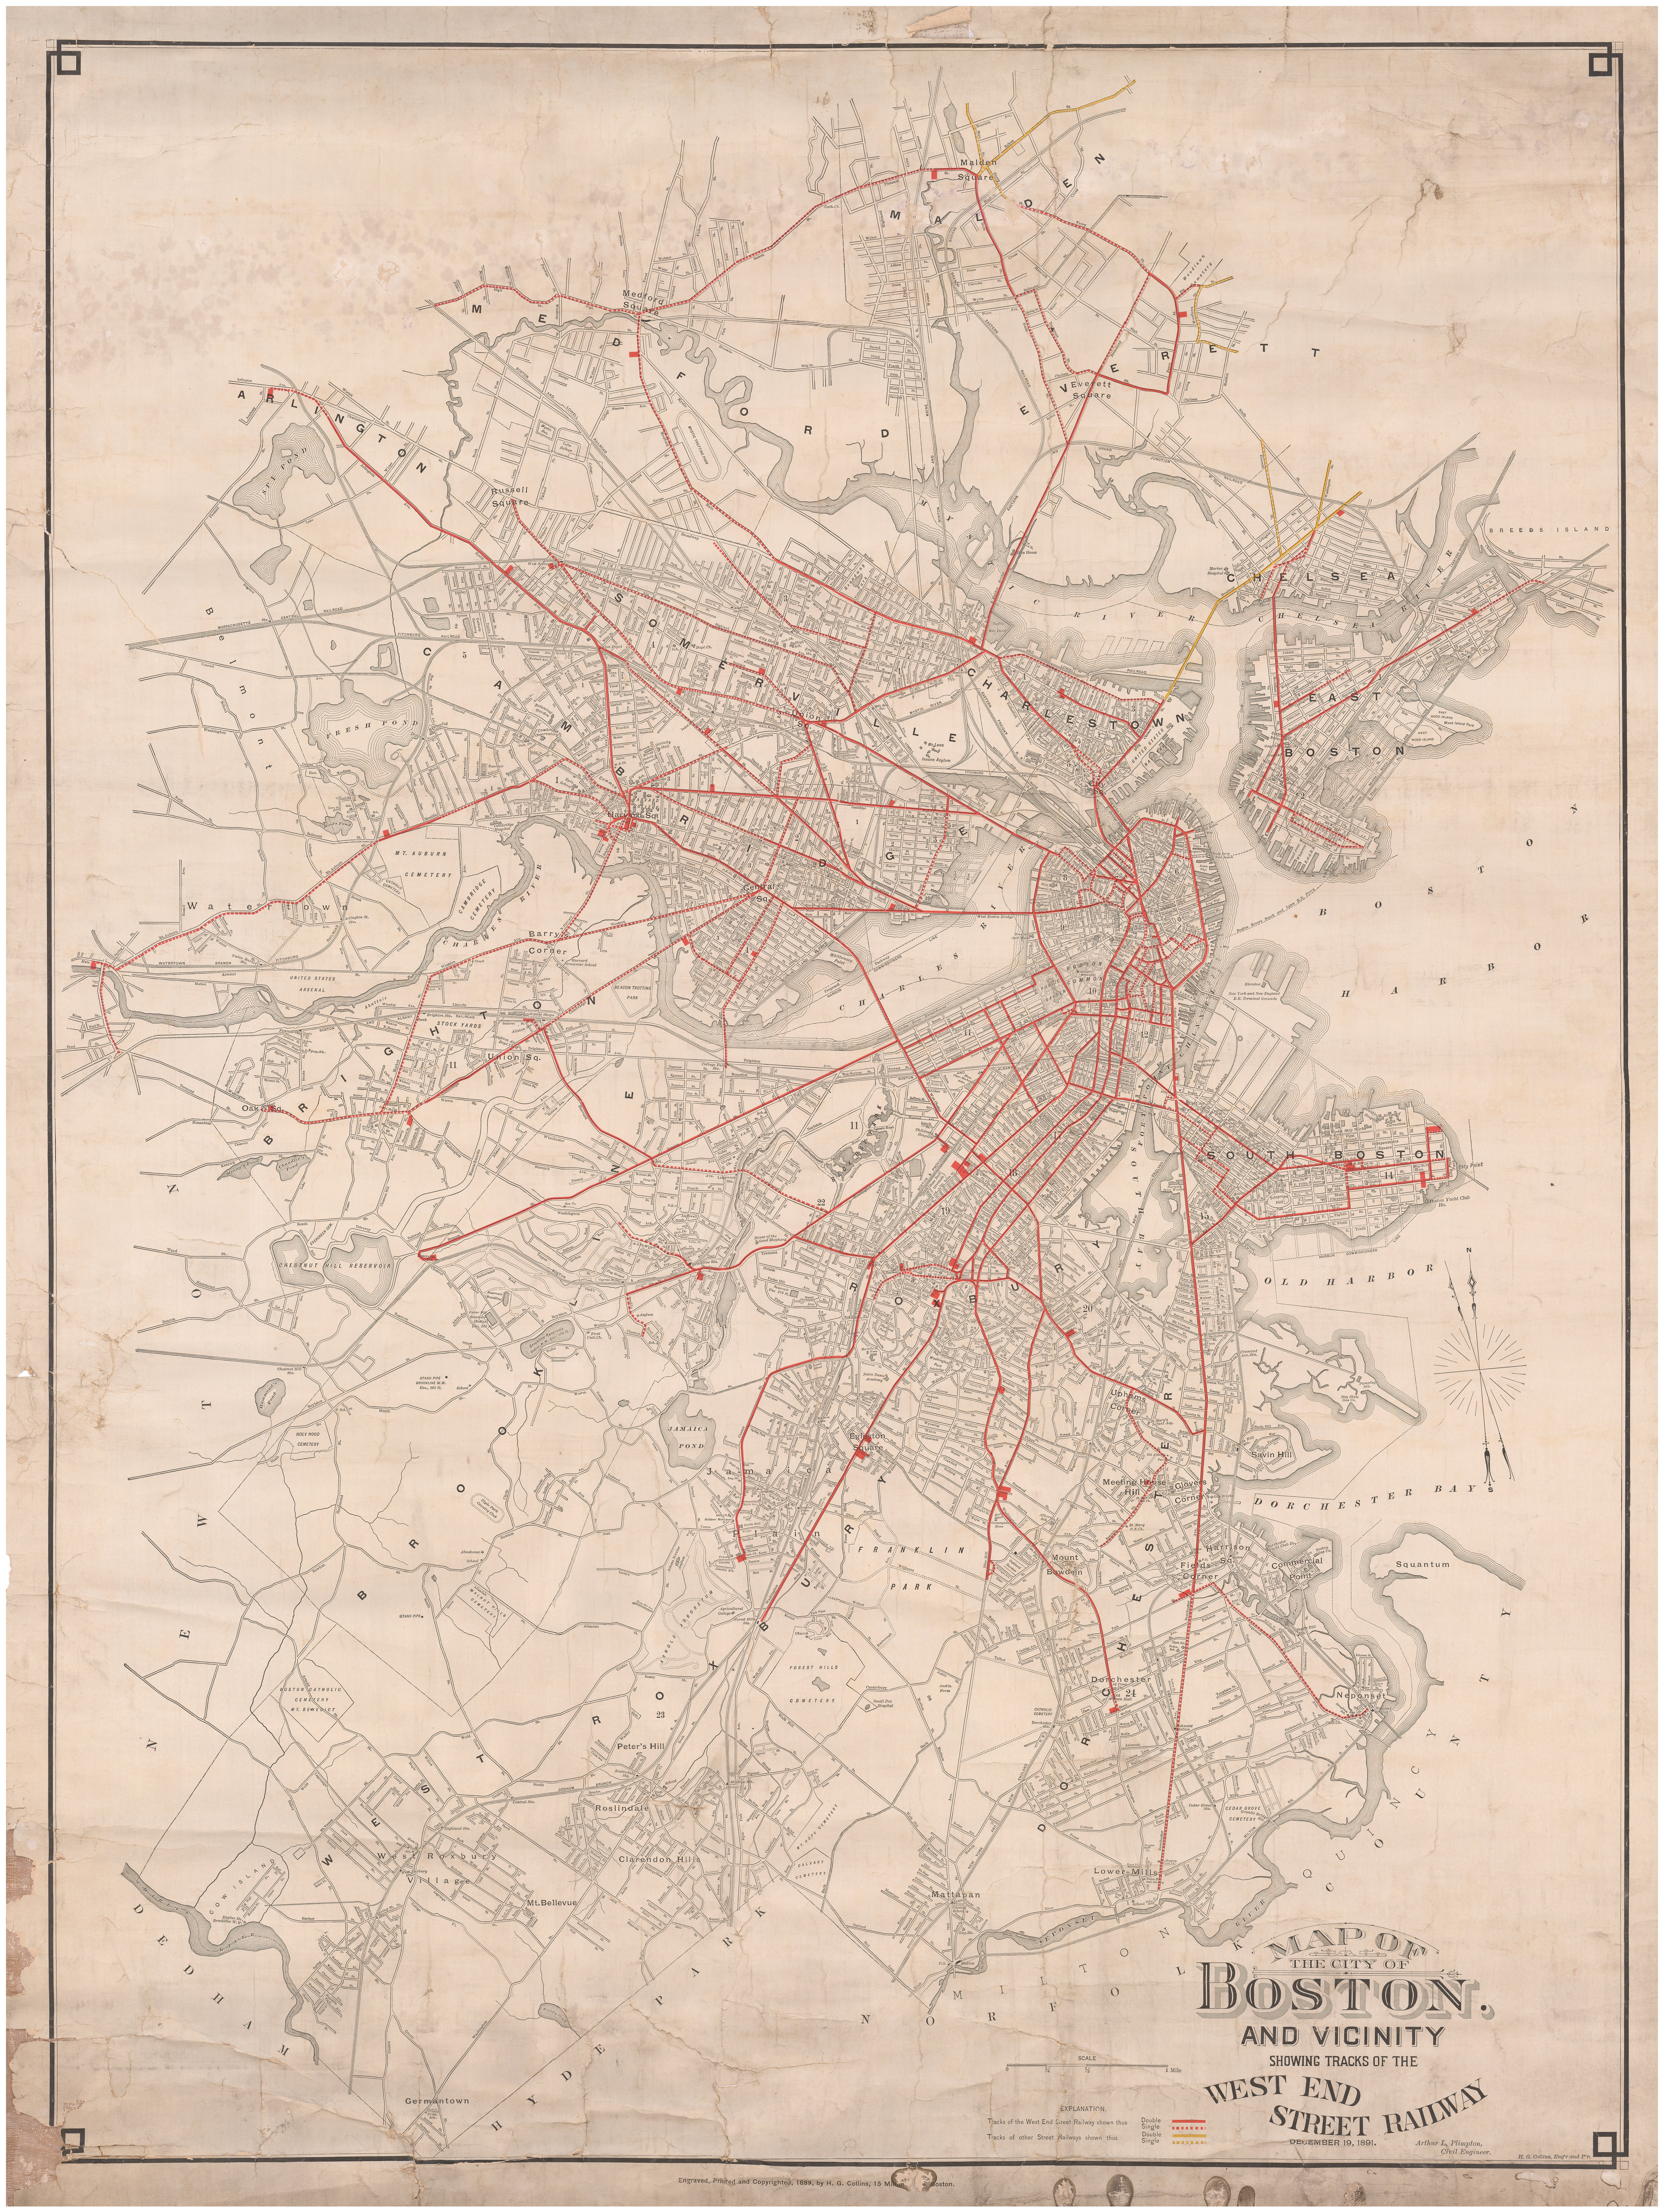 Image of Map of the City of Boston and Vicinity: Showing Tracks of the West End Street Railway